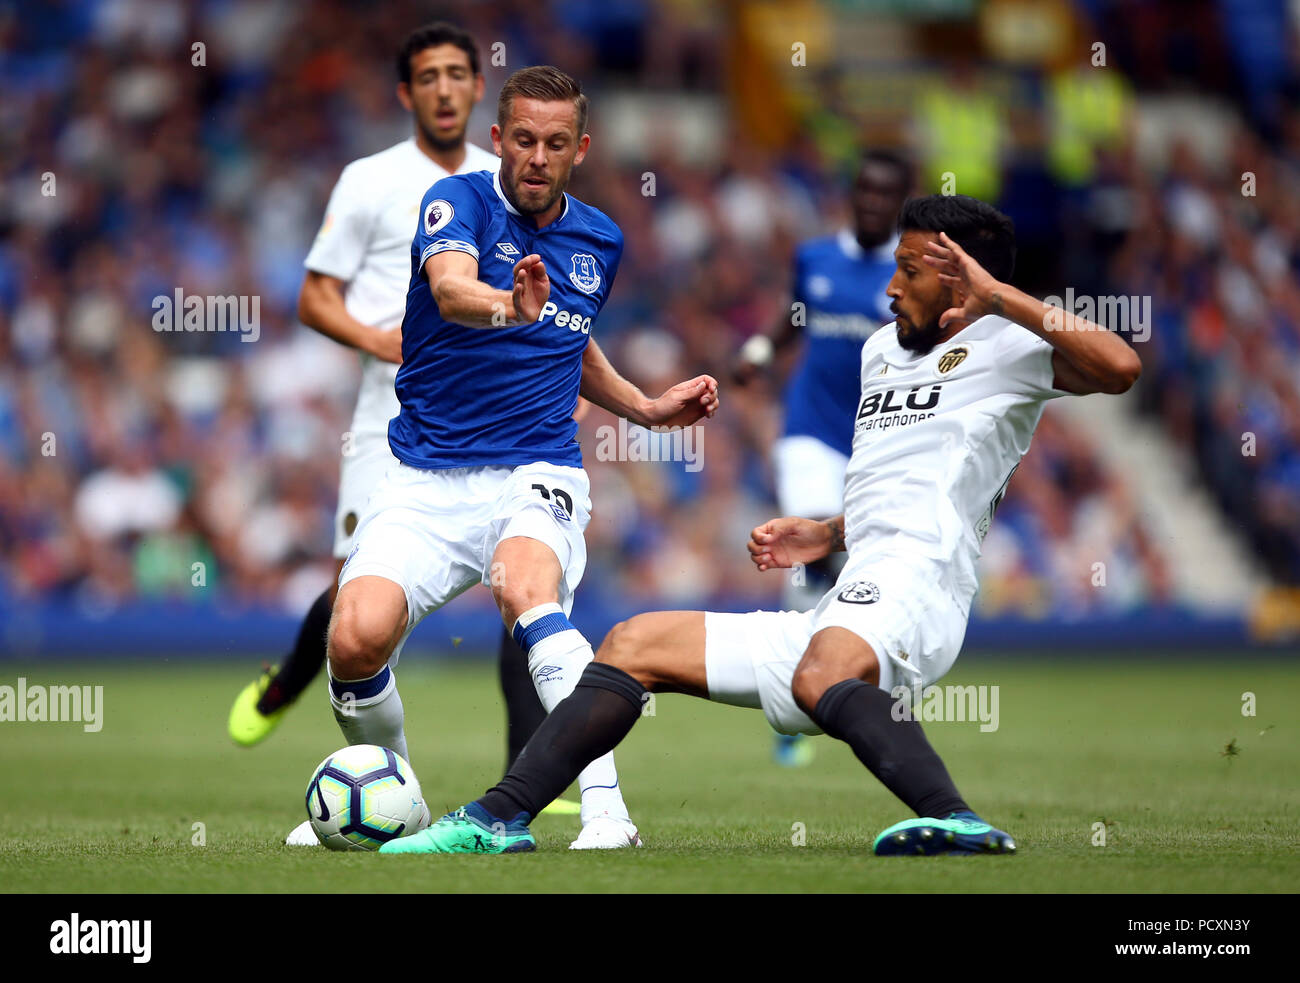 Everton's Gylfi Sigurdsson and Valencia's Ezequiel Garay (right) battle for the ball during the pre-season friendly match at Goodison Park, Liverpool. Stock Photo